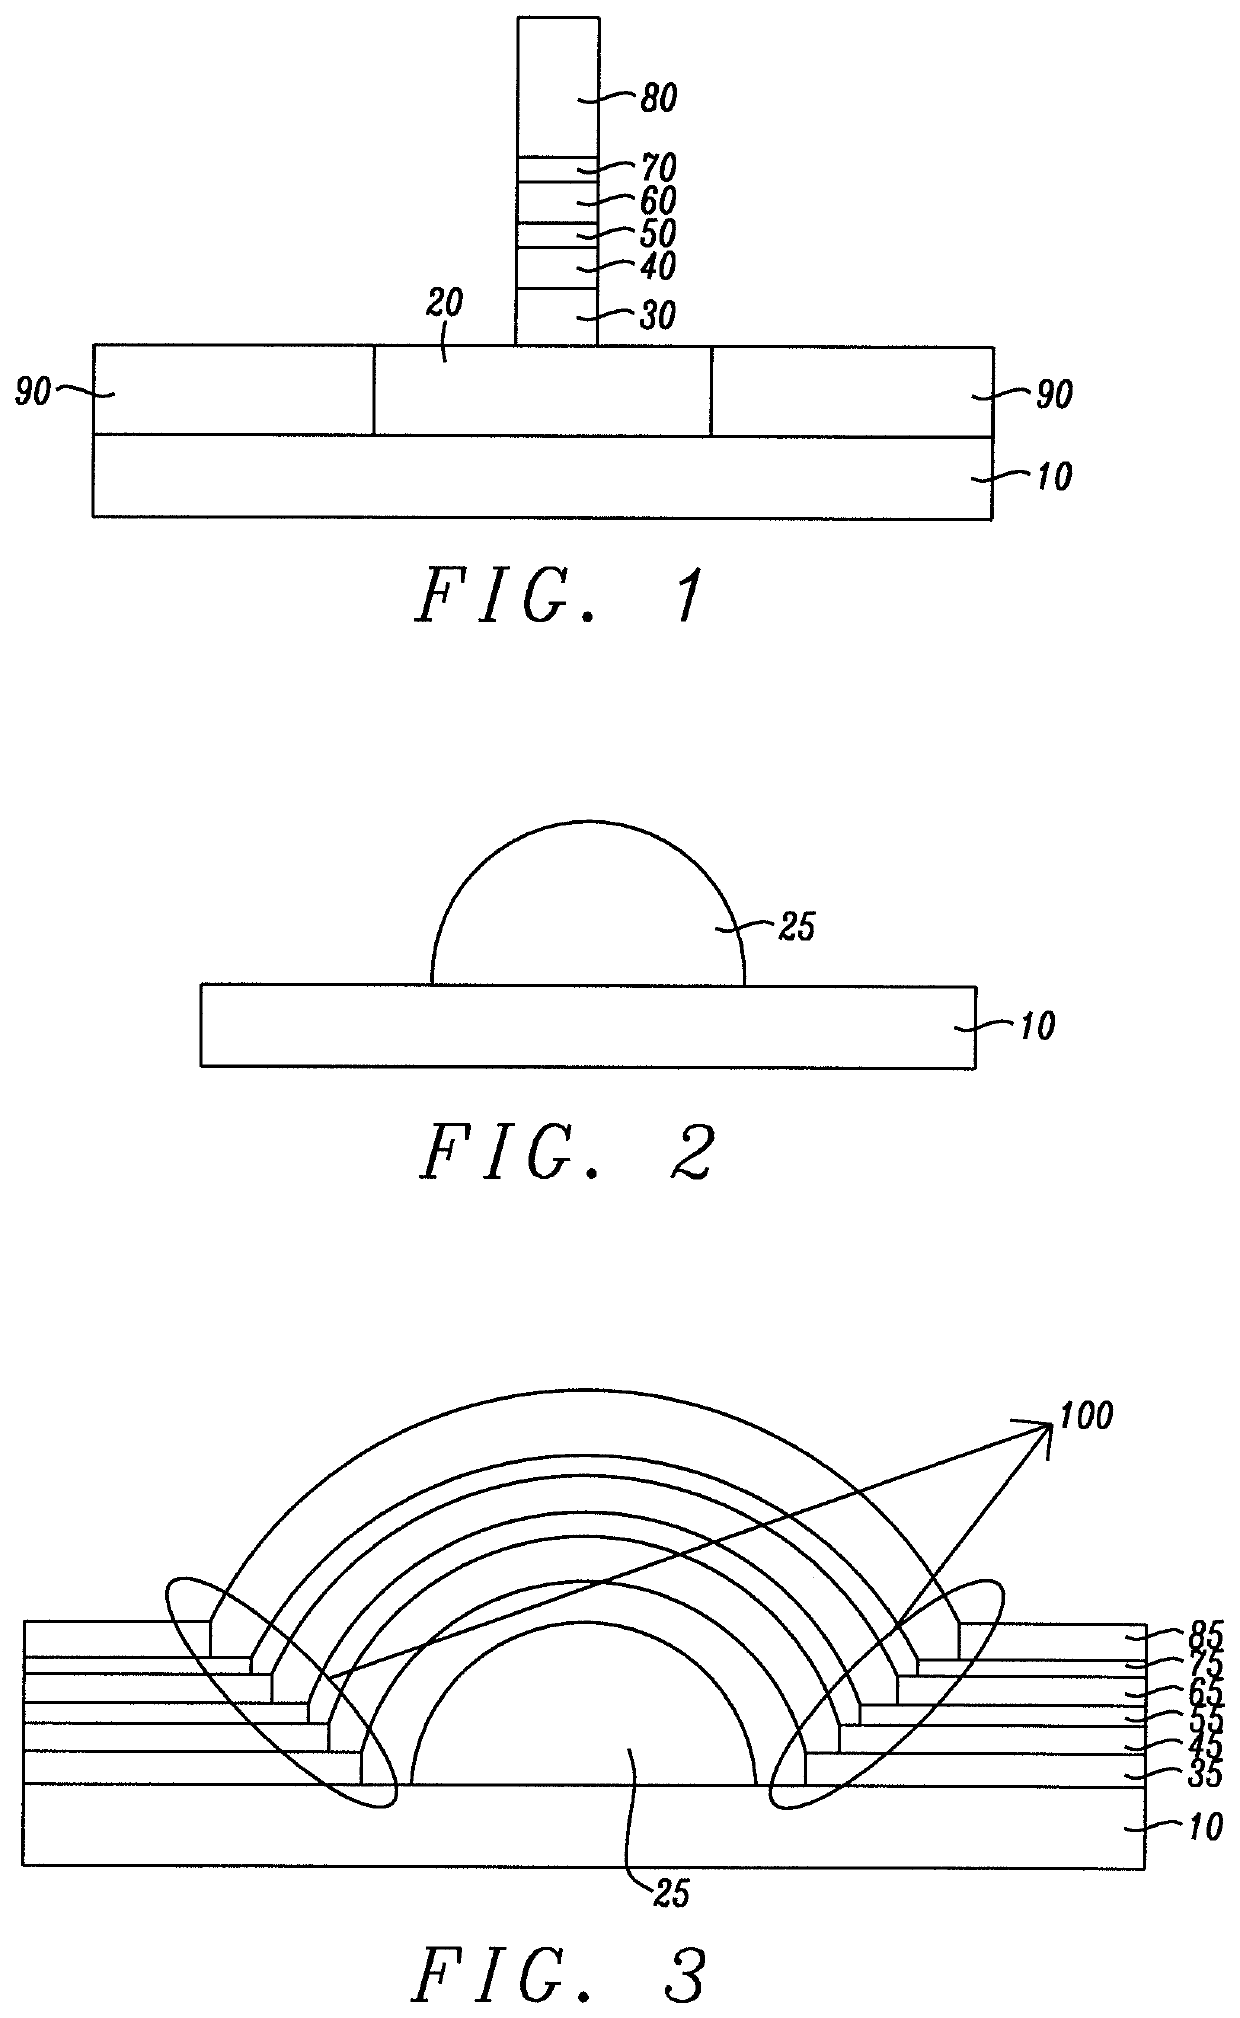 MTJ device performance by controlling device shape